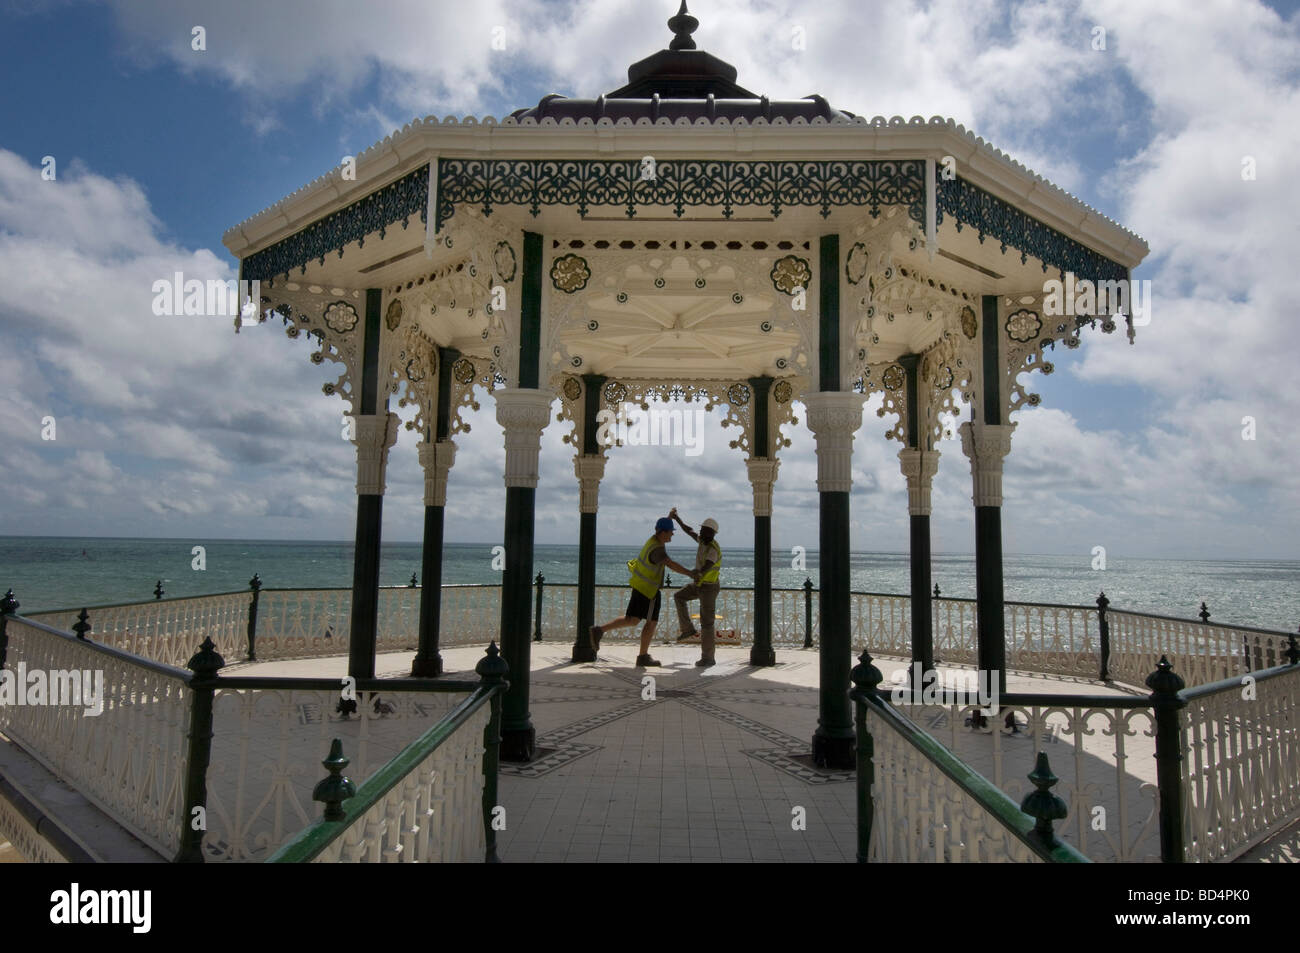 Two burly builders in hard hats and safety vests dance to celebrate the million pound refurbishment of Brighton bandstand. Stock Photo